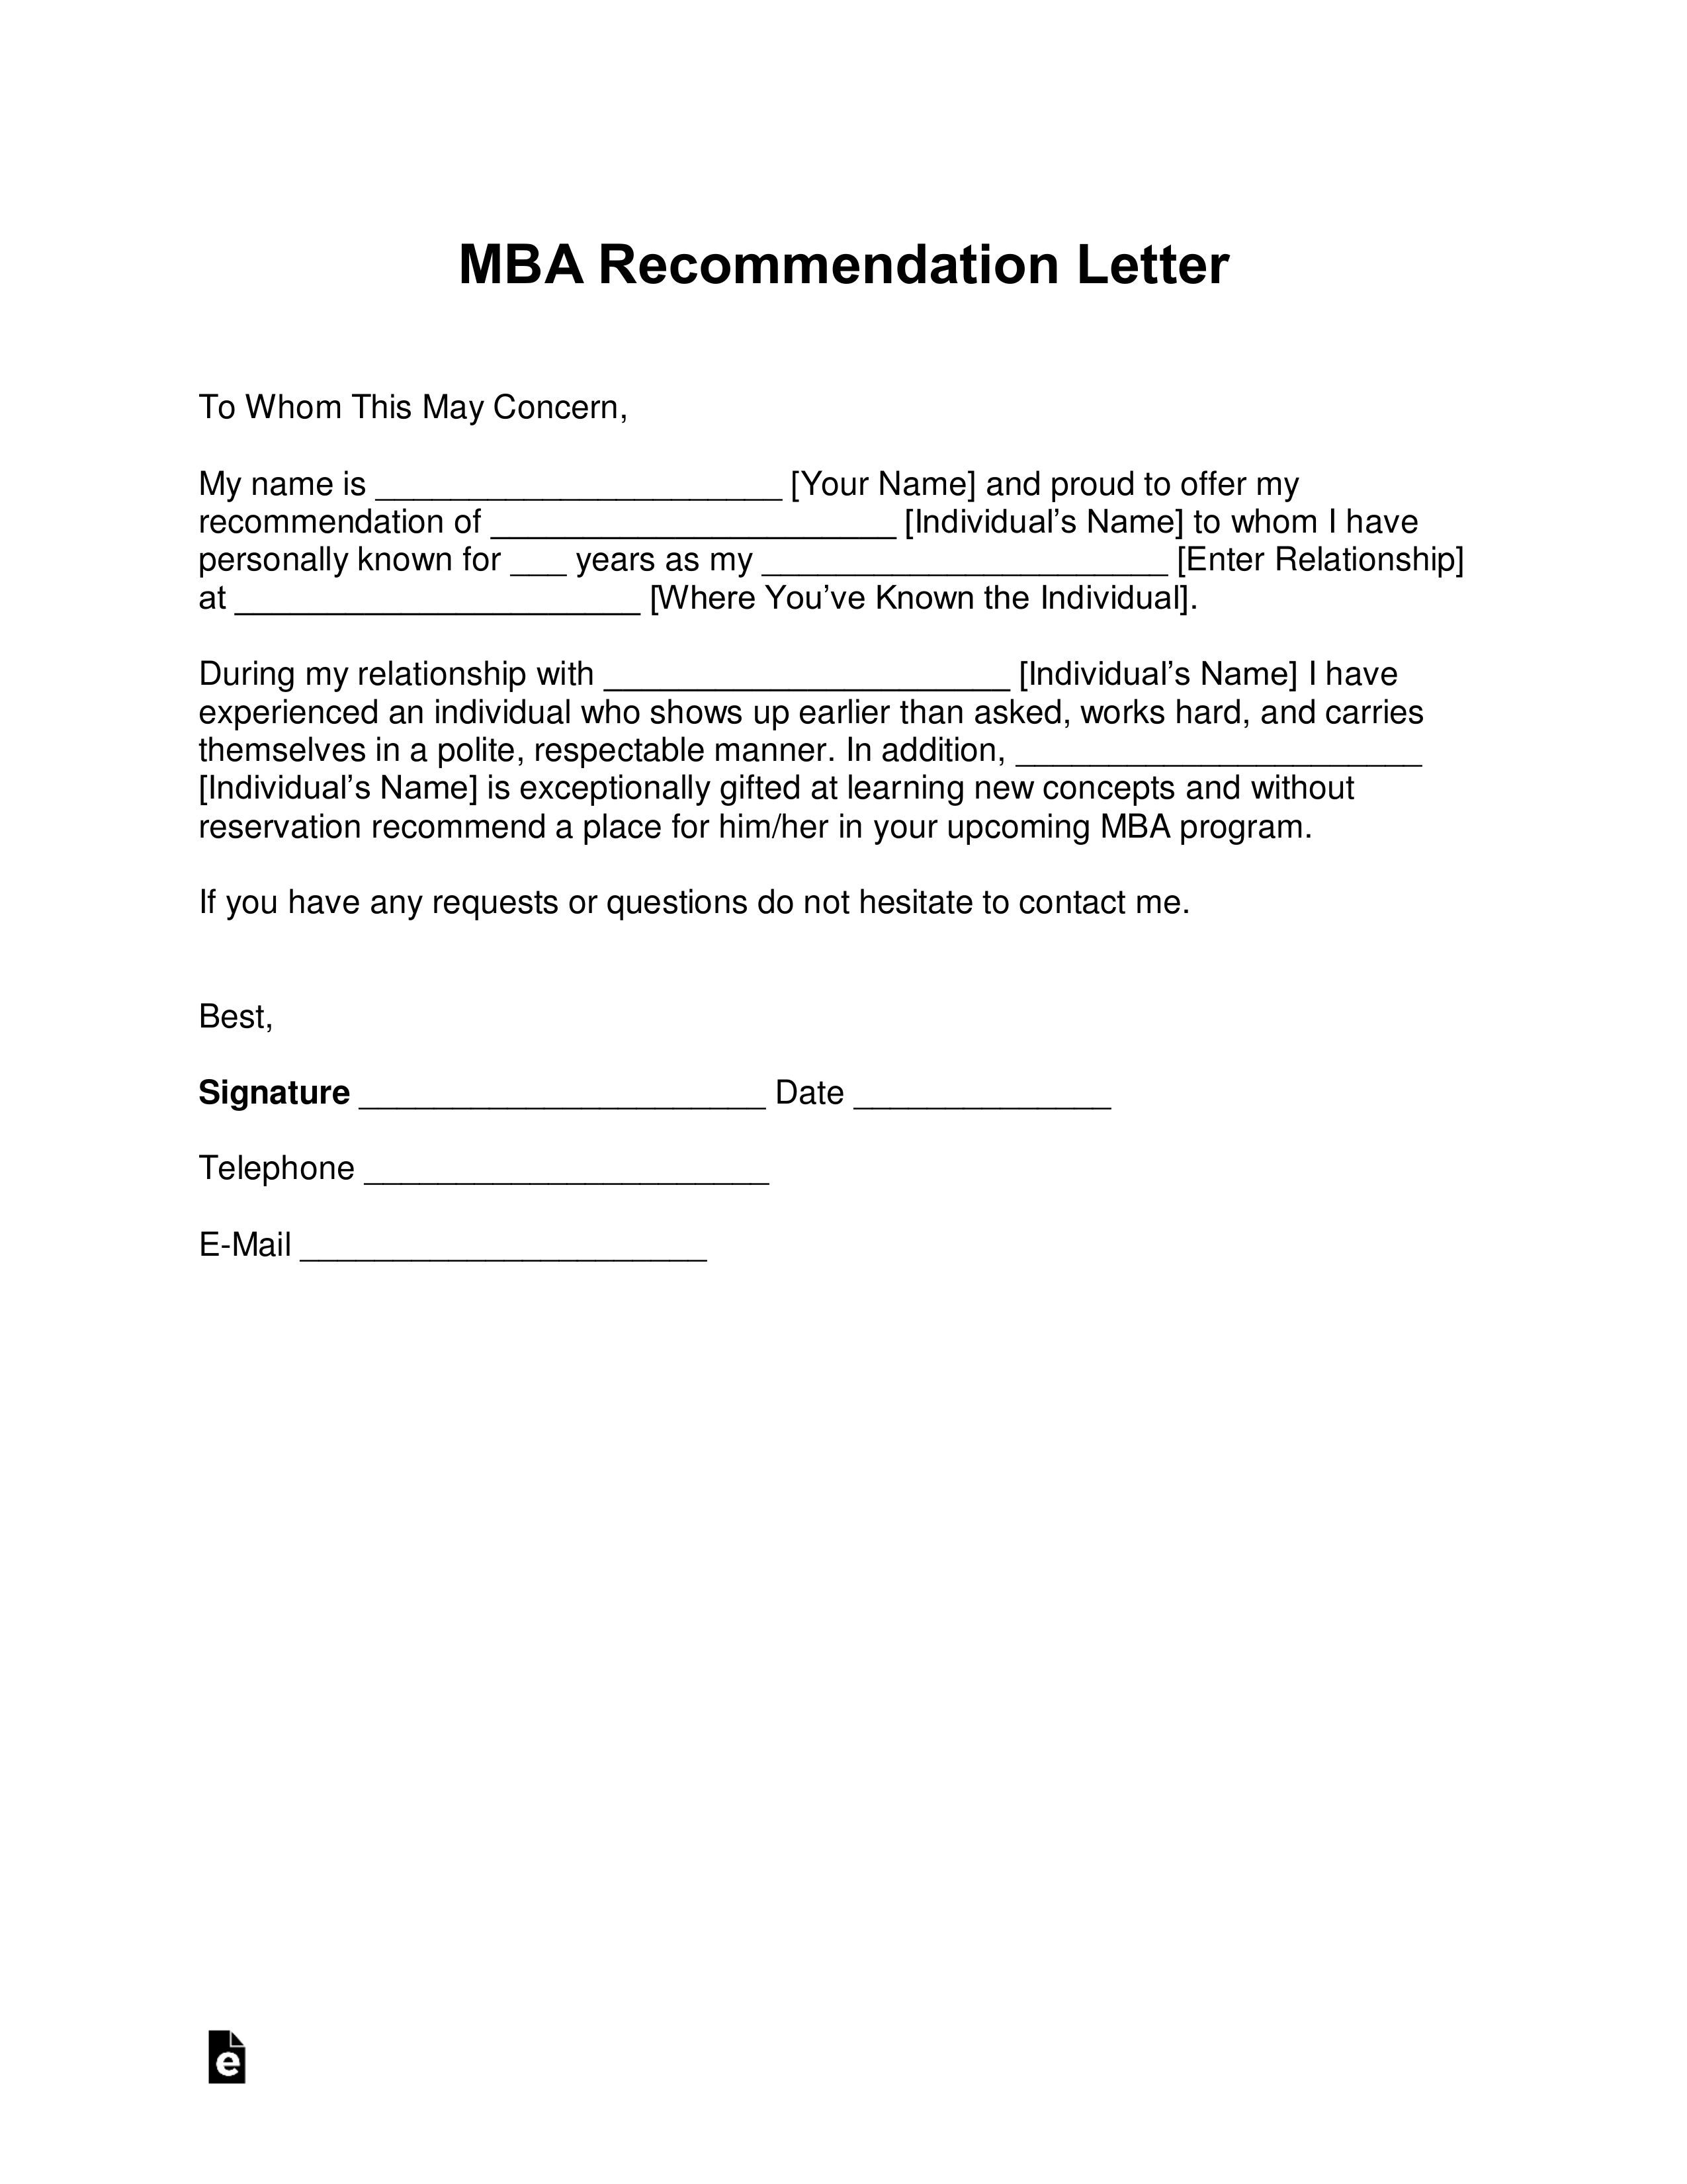 MBA Letter of Recommendation Template – with Samples